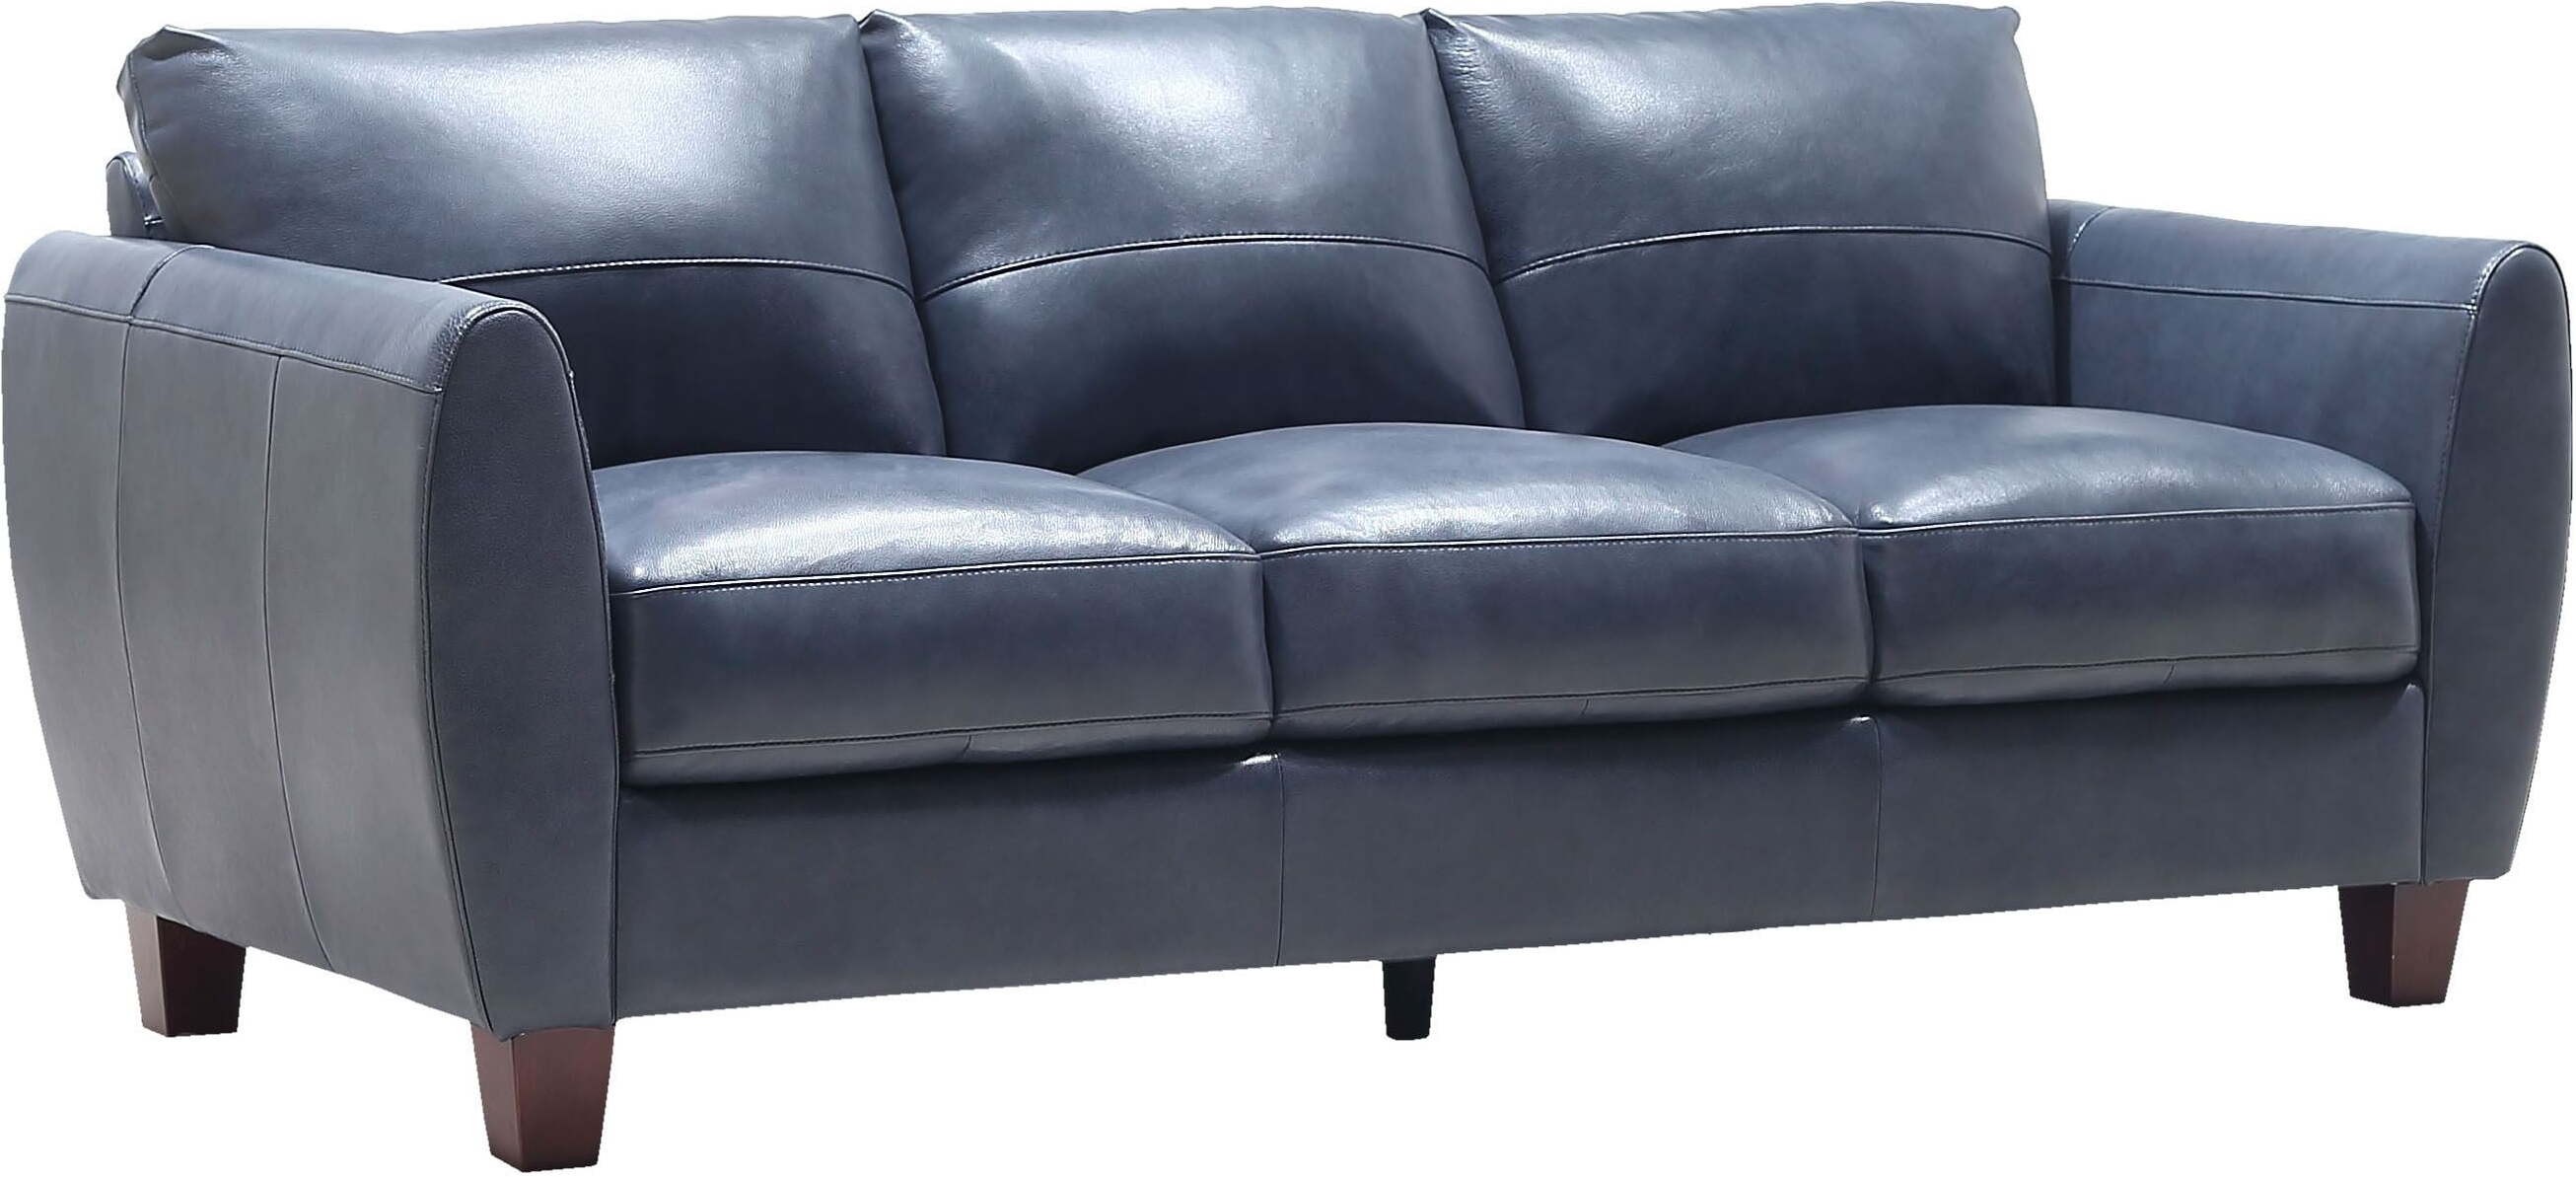 blue leather sofa bed